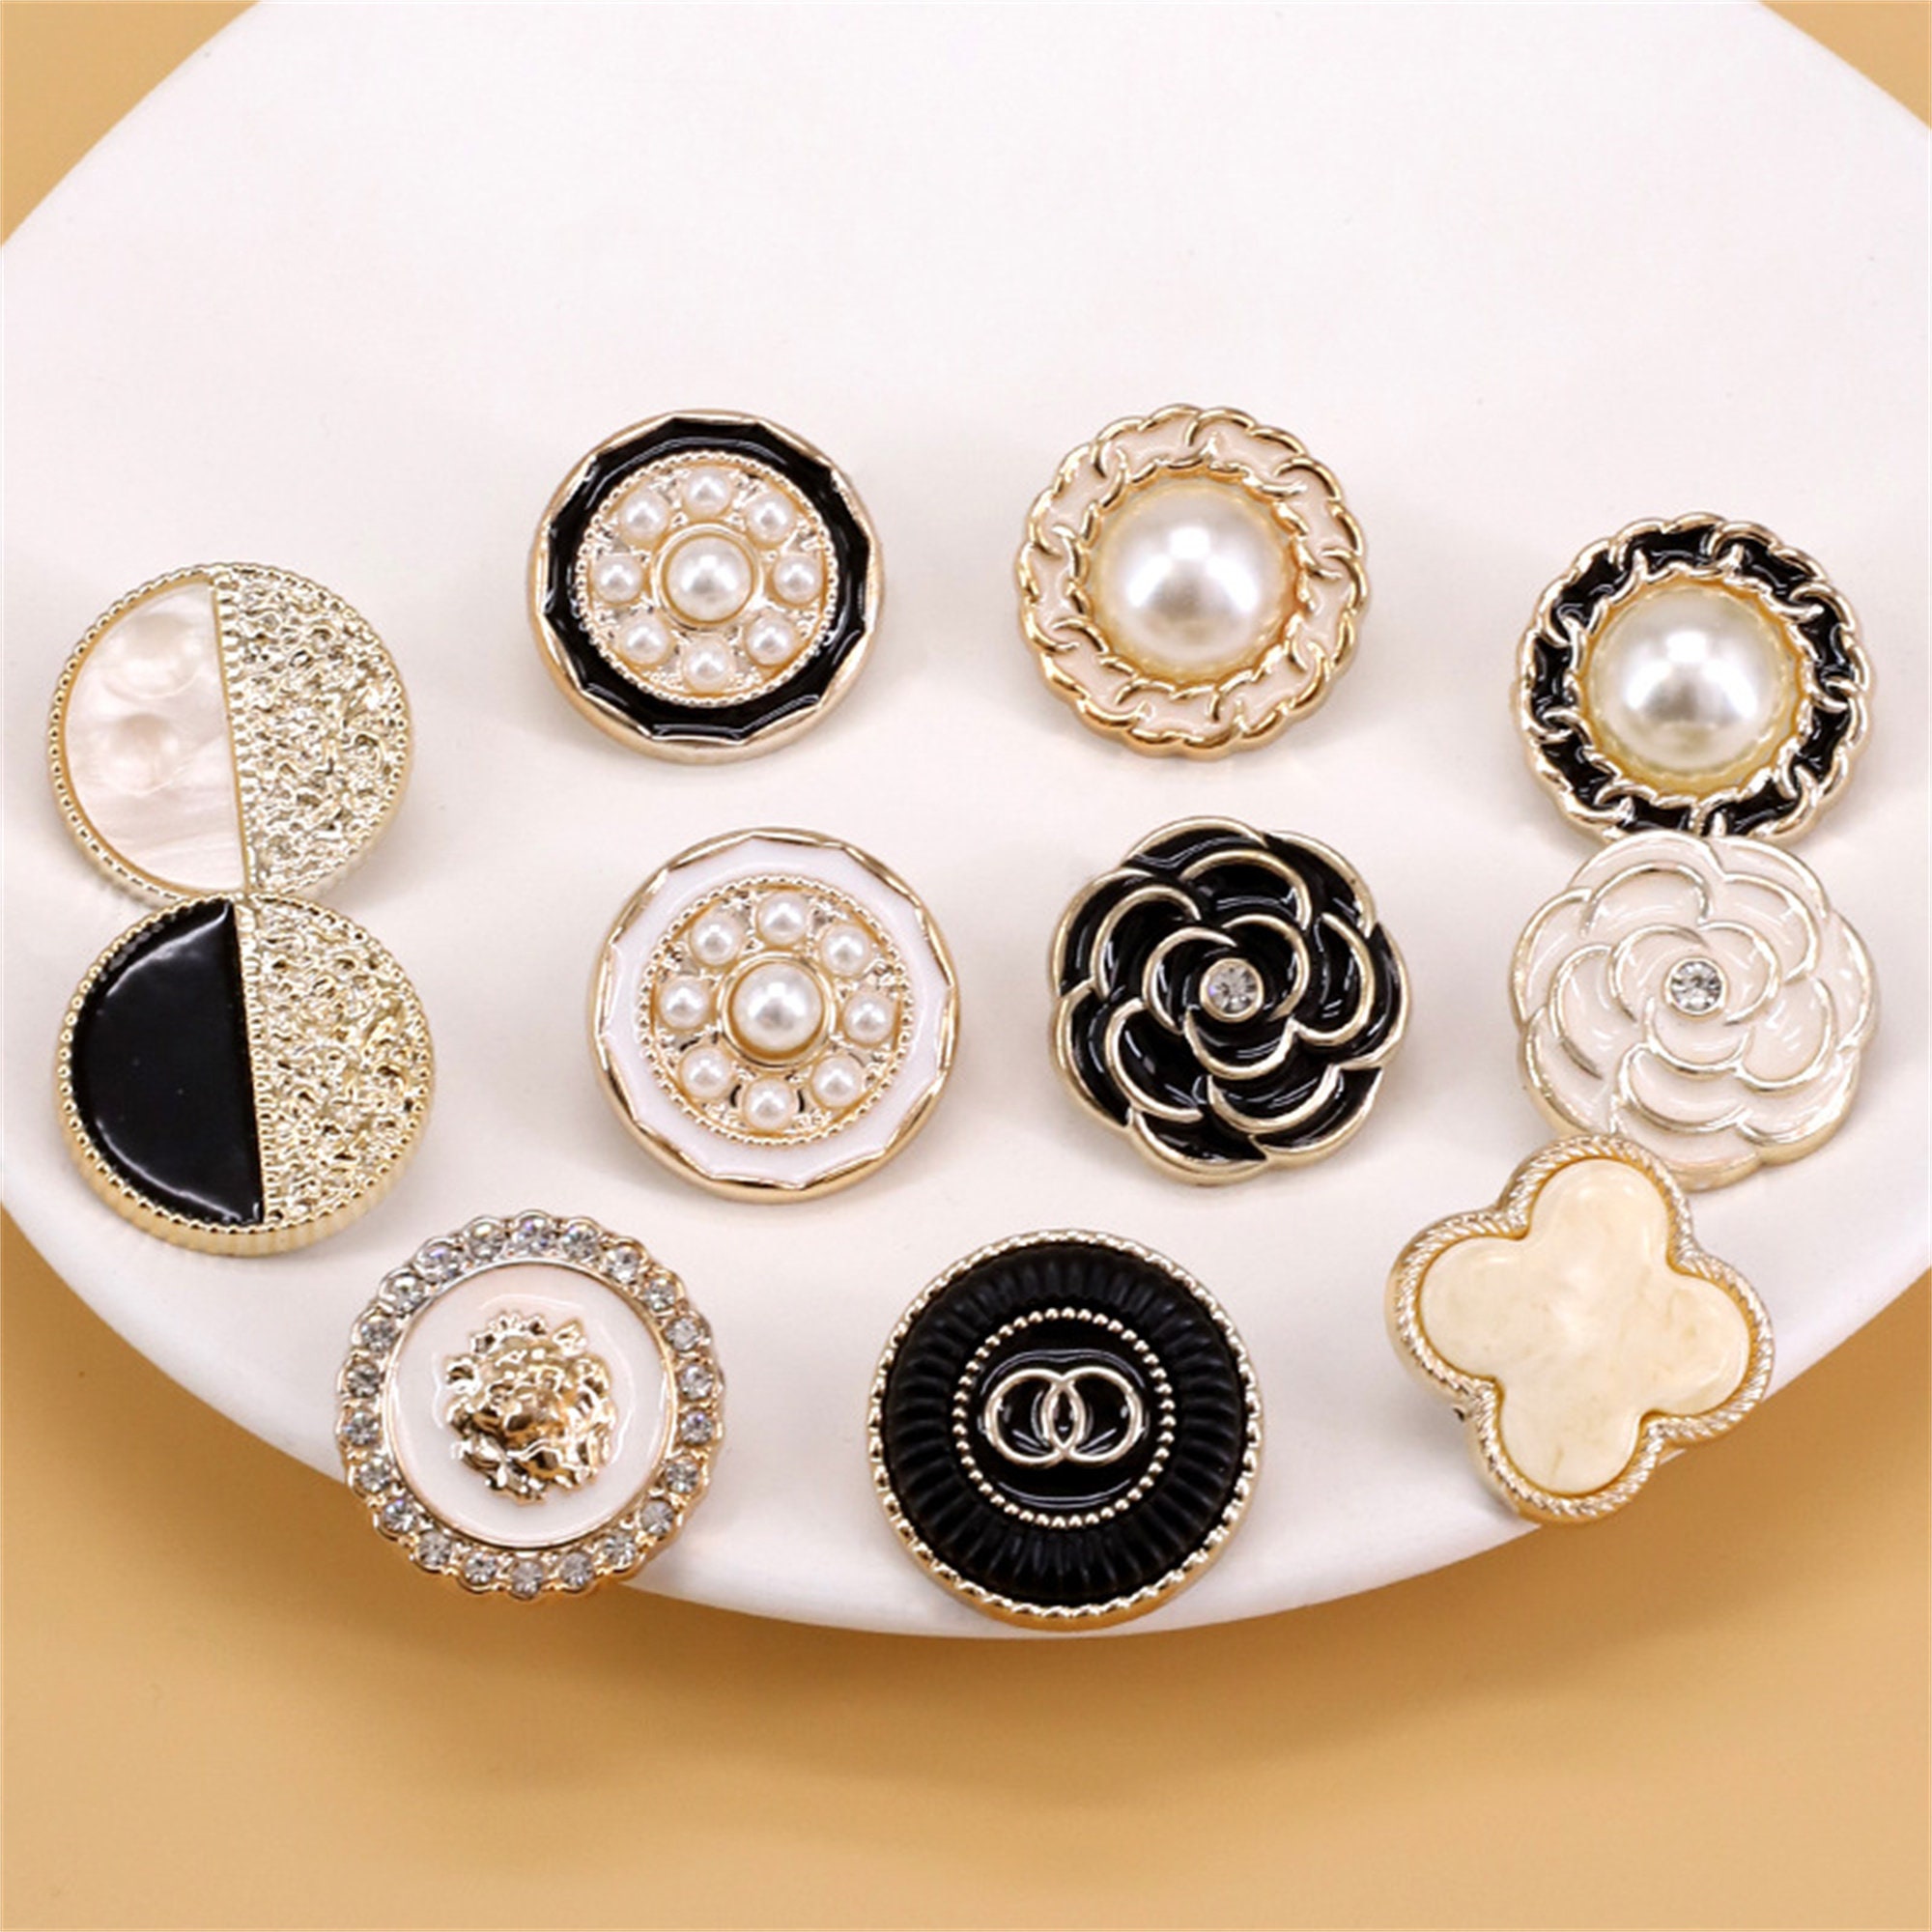 How to recognize authentic Chanel buttons - SEWING CHANEL-STYLE